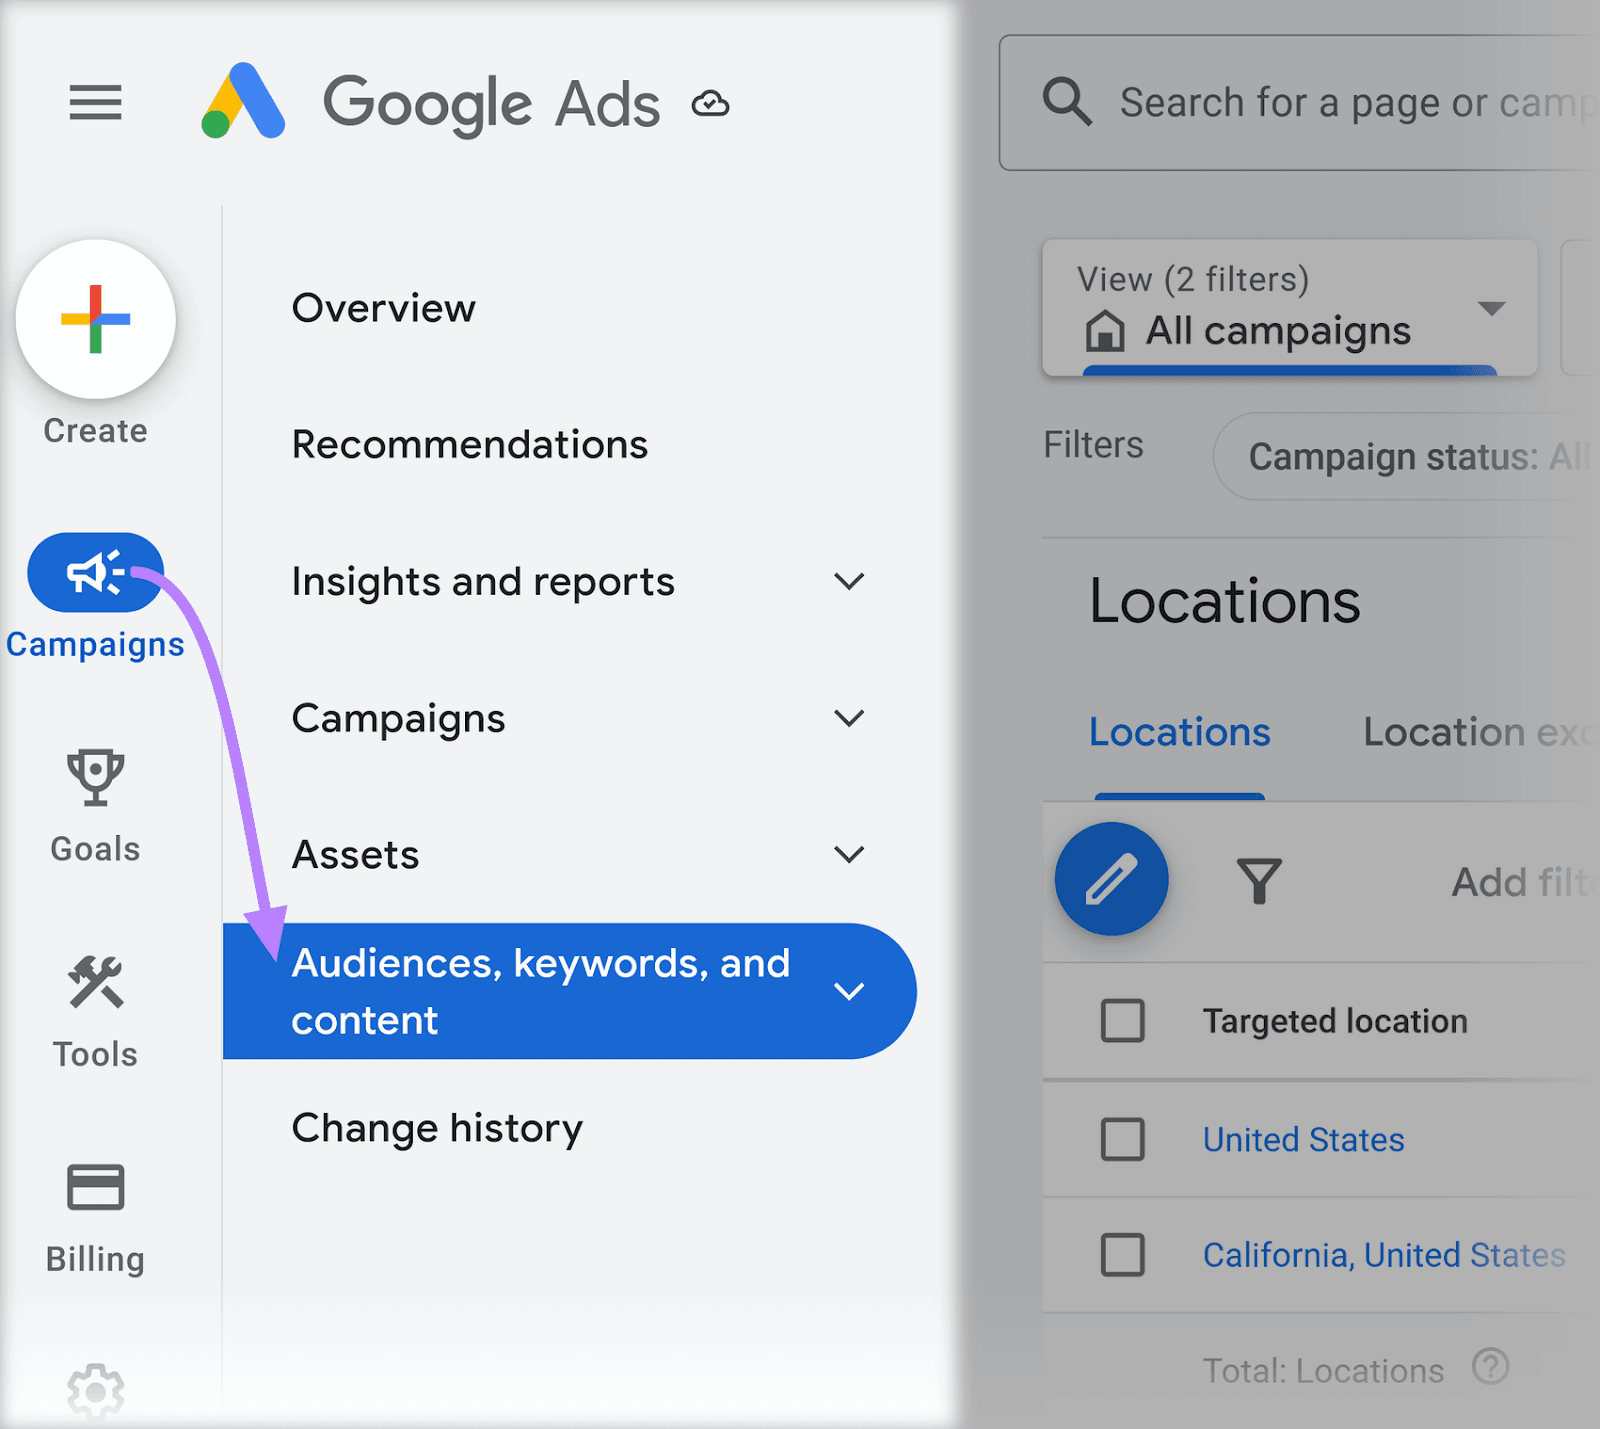 Navigating to “Campaigns” > “Audiences, keywords and content” in Google Ads